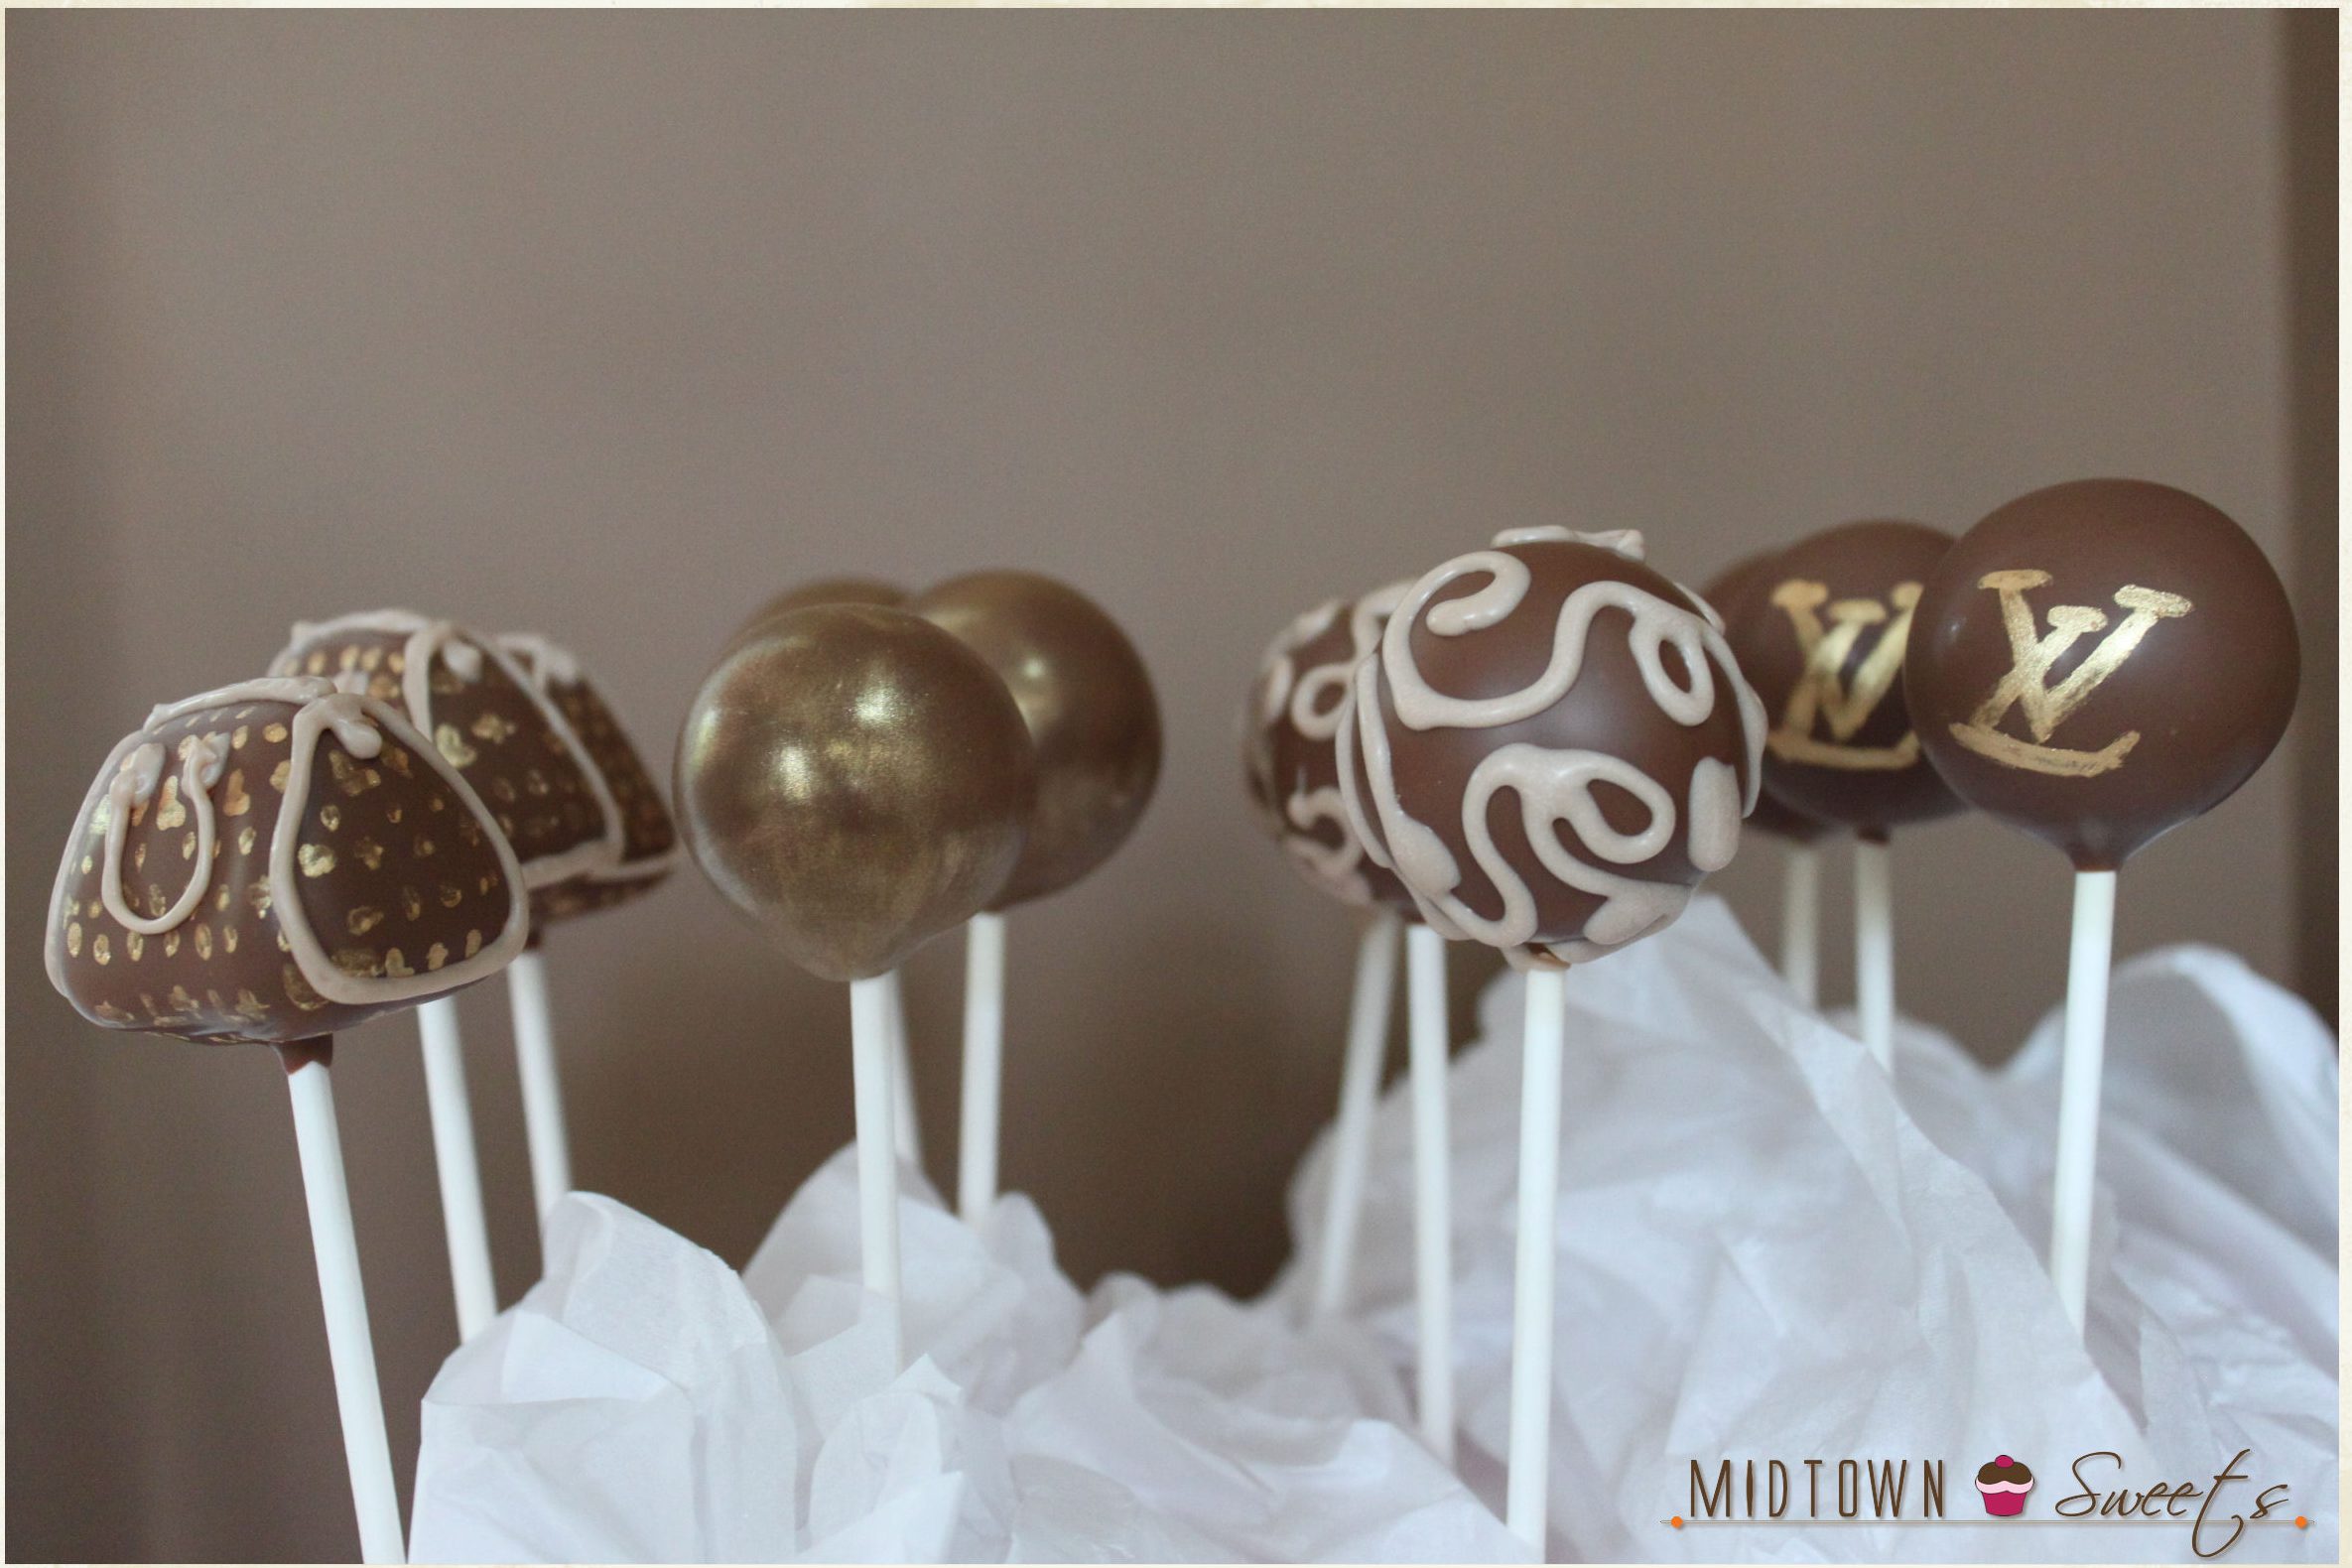 Pop Fashion Part 2 – Midtown Sweets